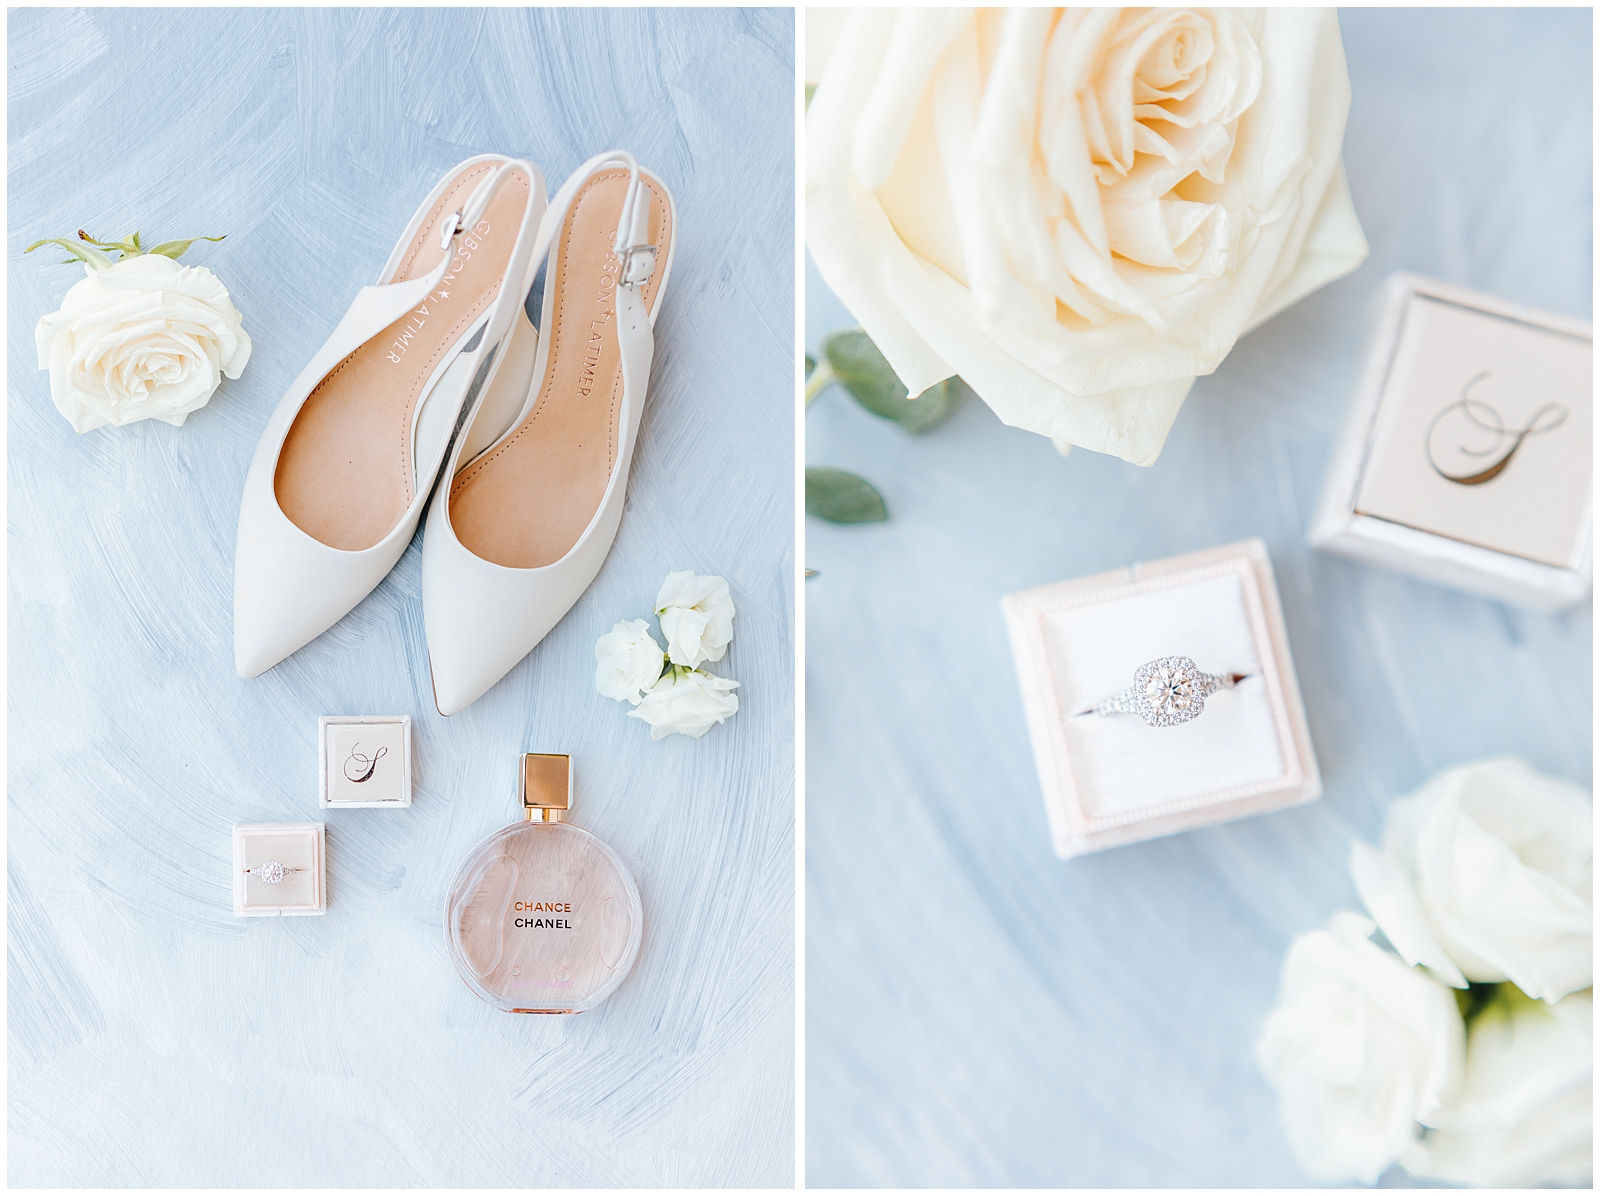 Dusty Blue Fox Canyon Vineyards Wedding Details with Mrs. Box and Chanel Perfume